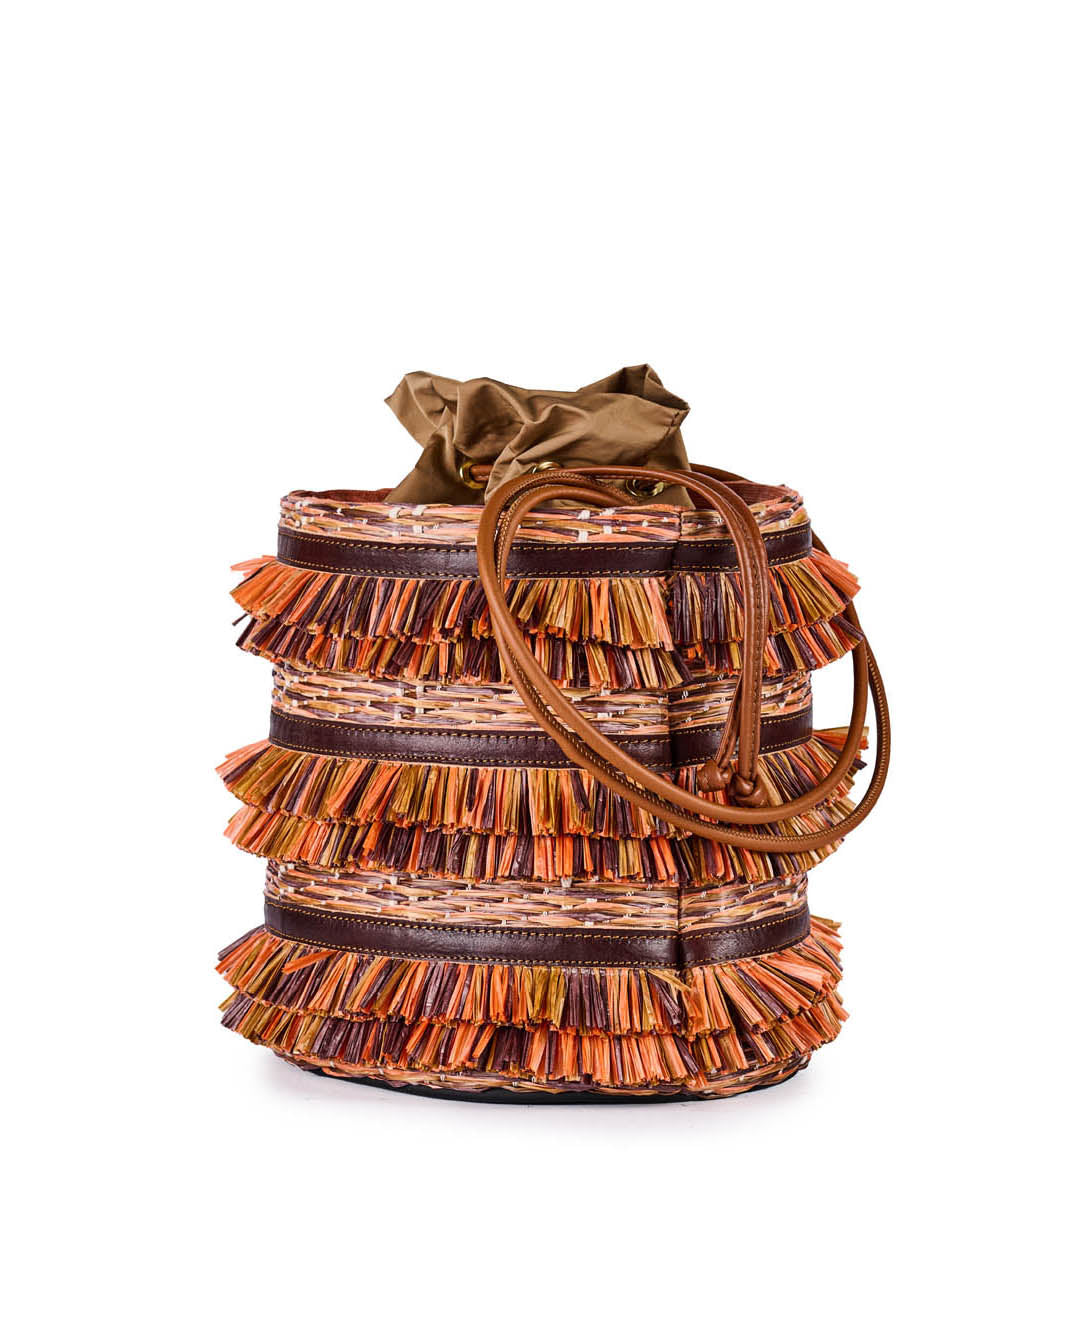 Colorful woven straw handbag with leather handles and drawstring closure